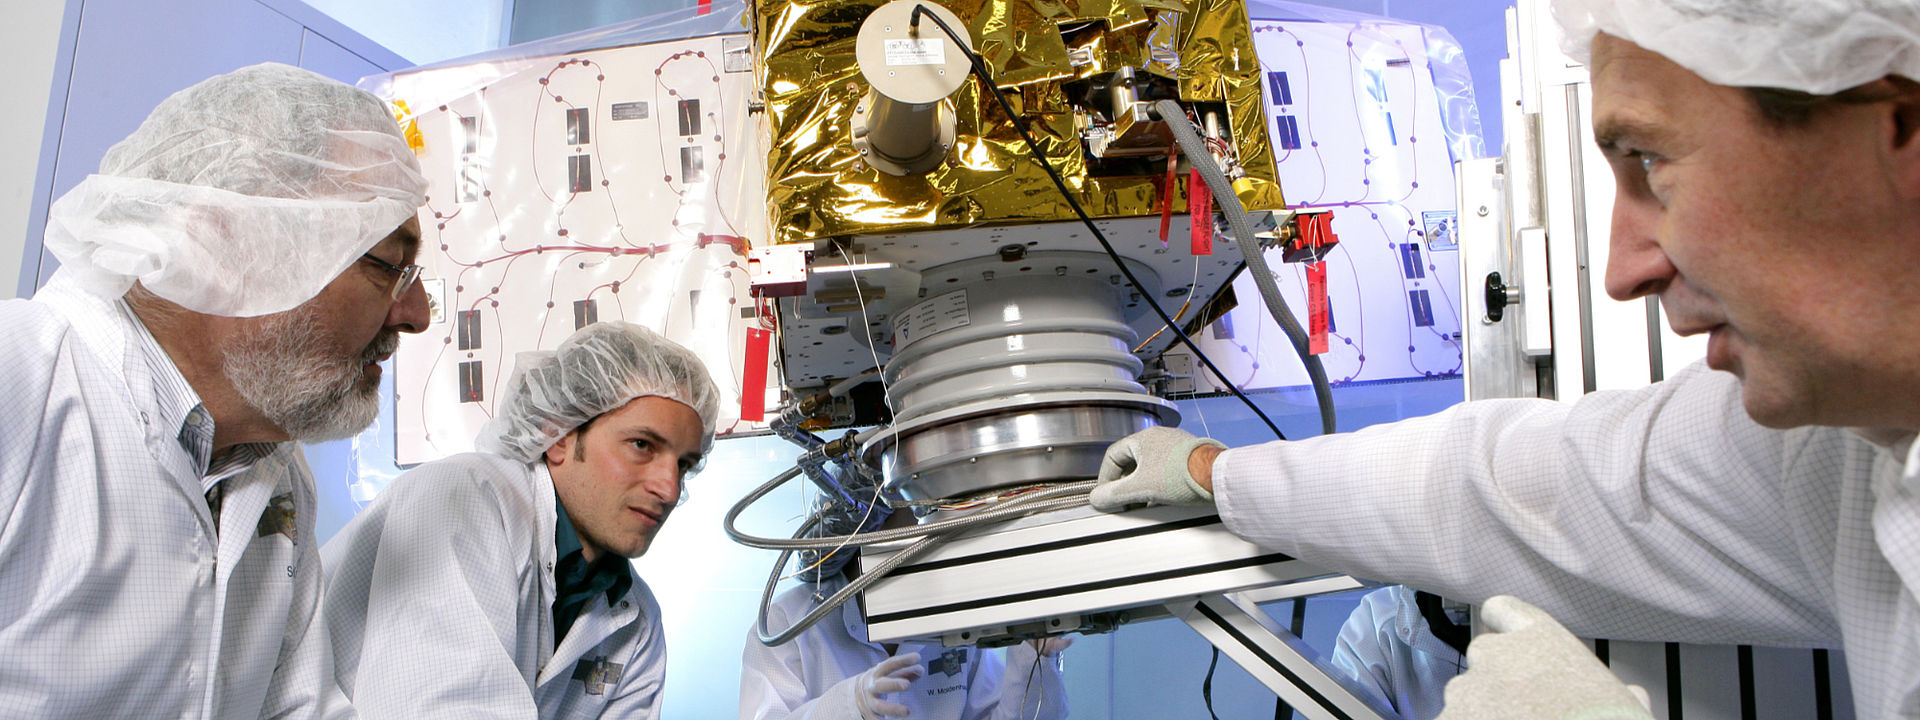 Two OHB employees working on satellites in a clean room